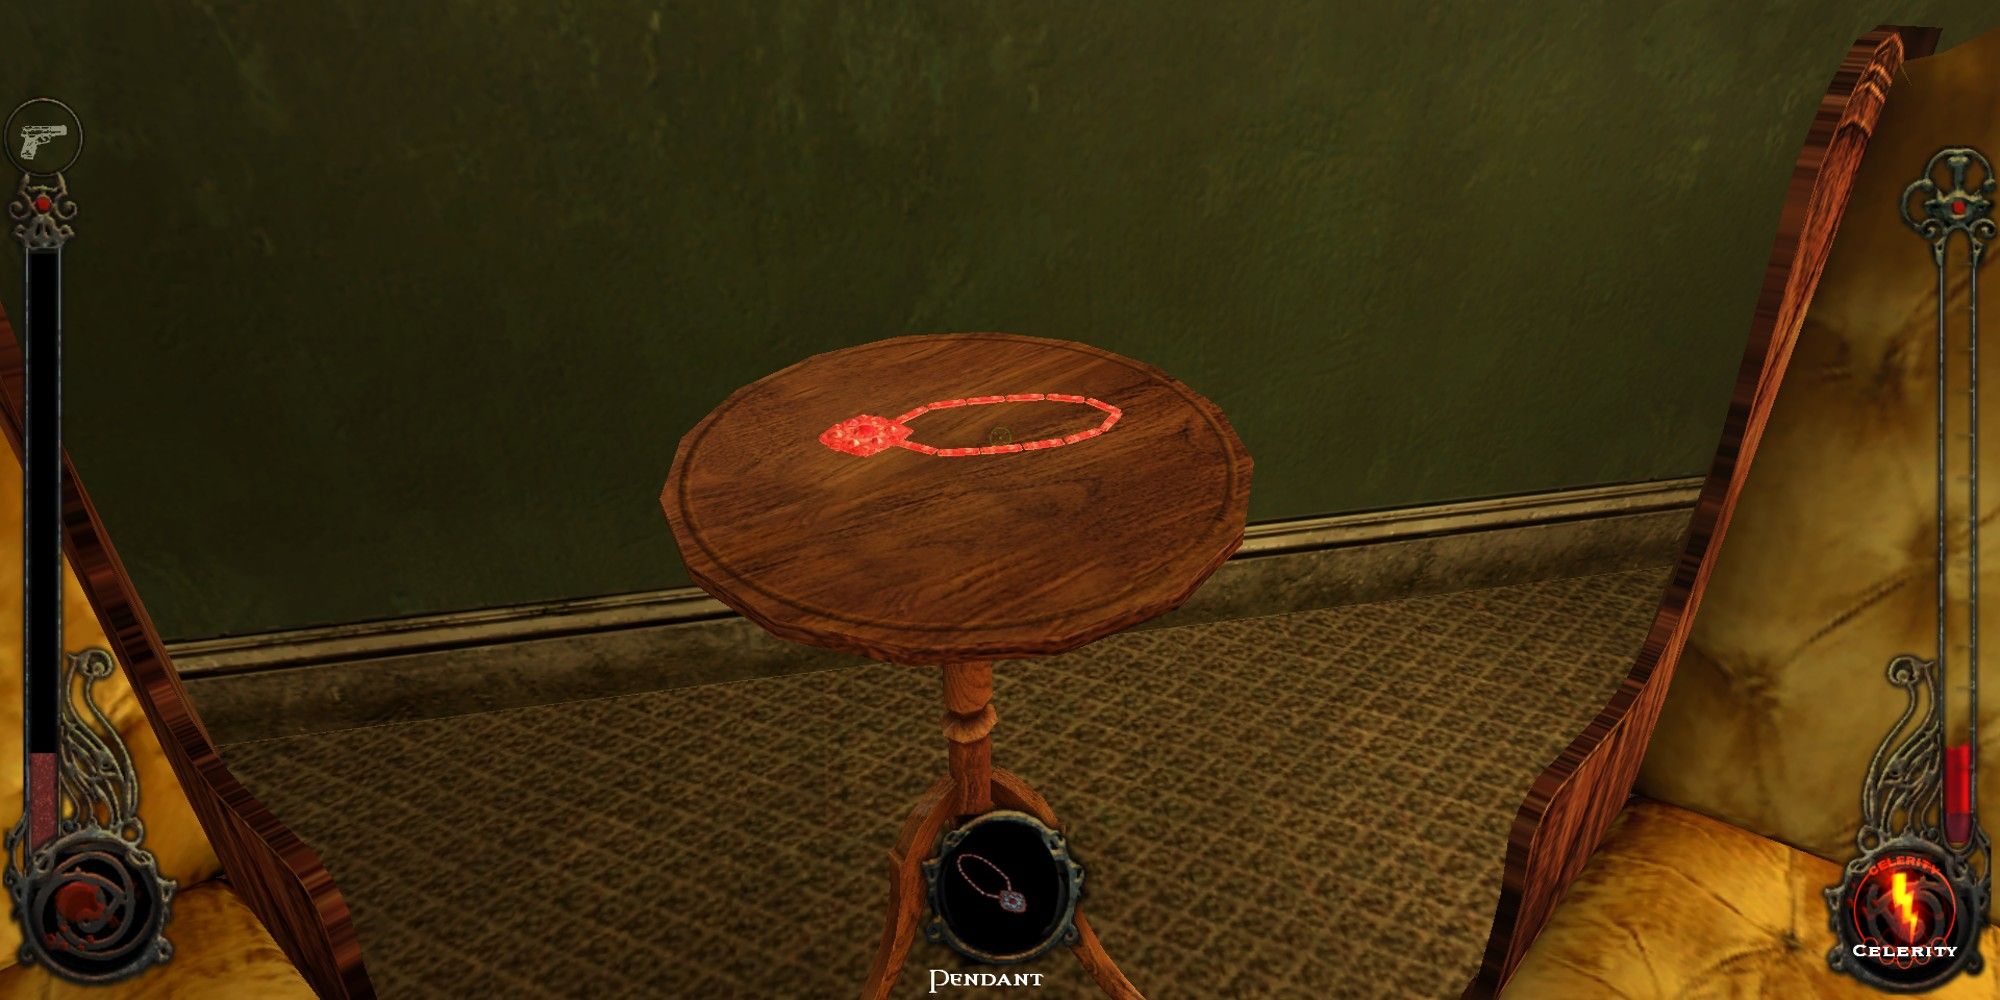 The pendant in the Ocean House Hotel in Vampire: The Masquerade - Bloodlines